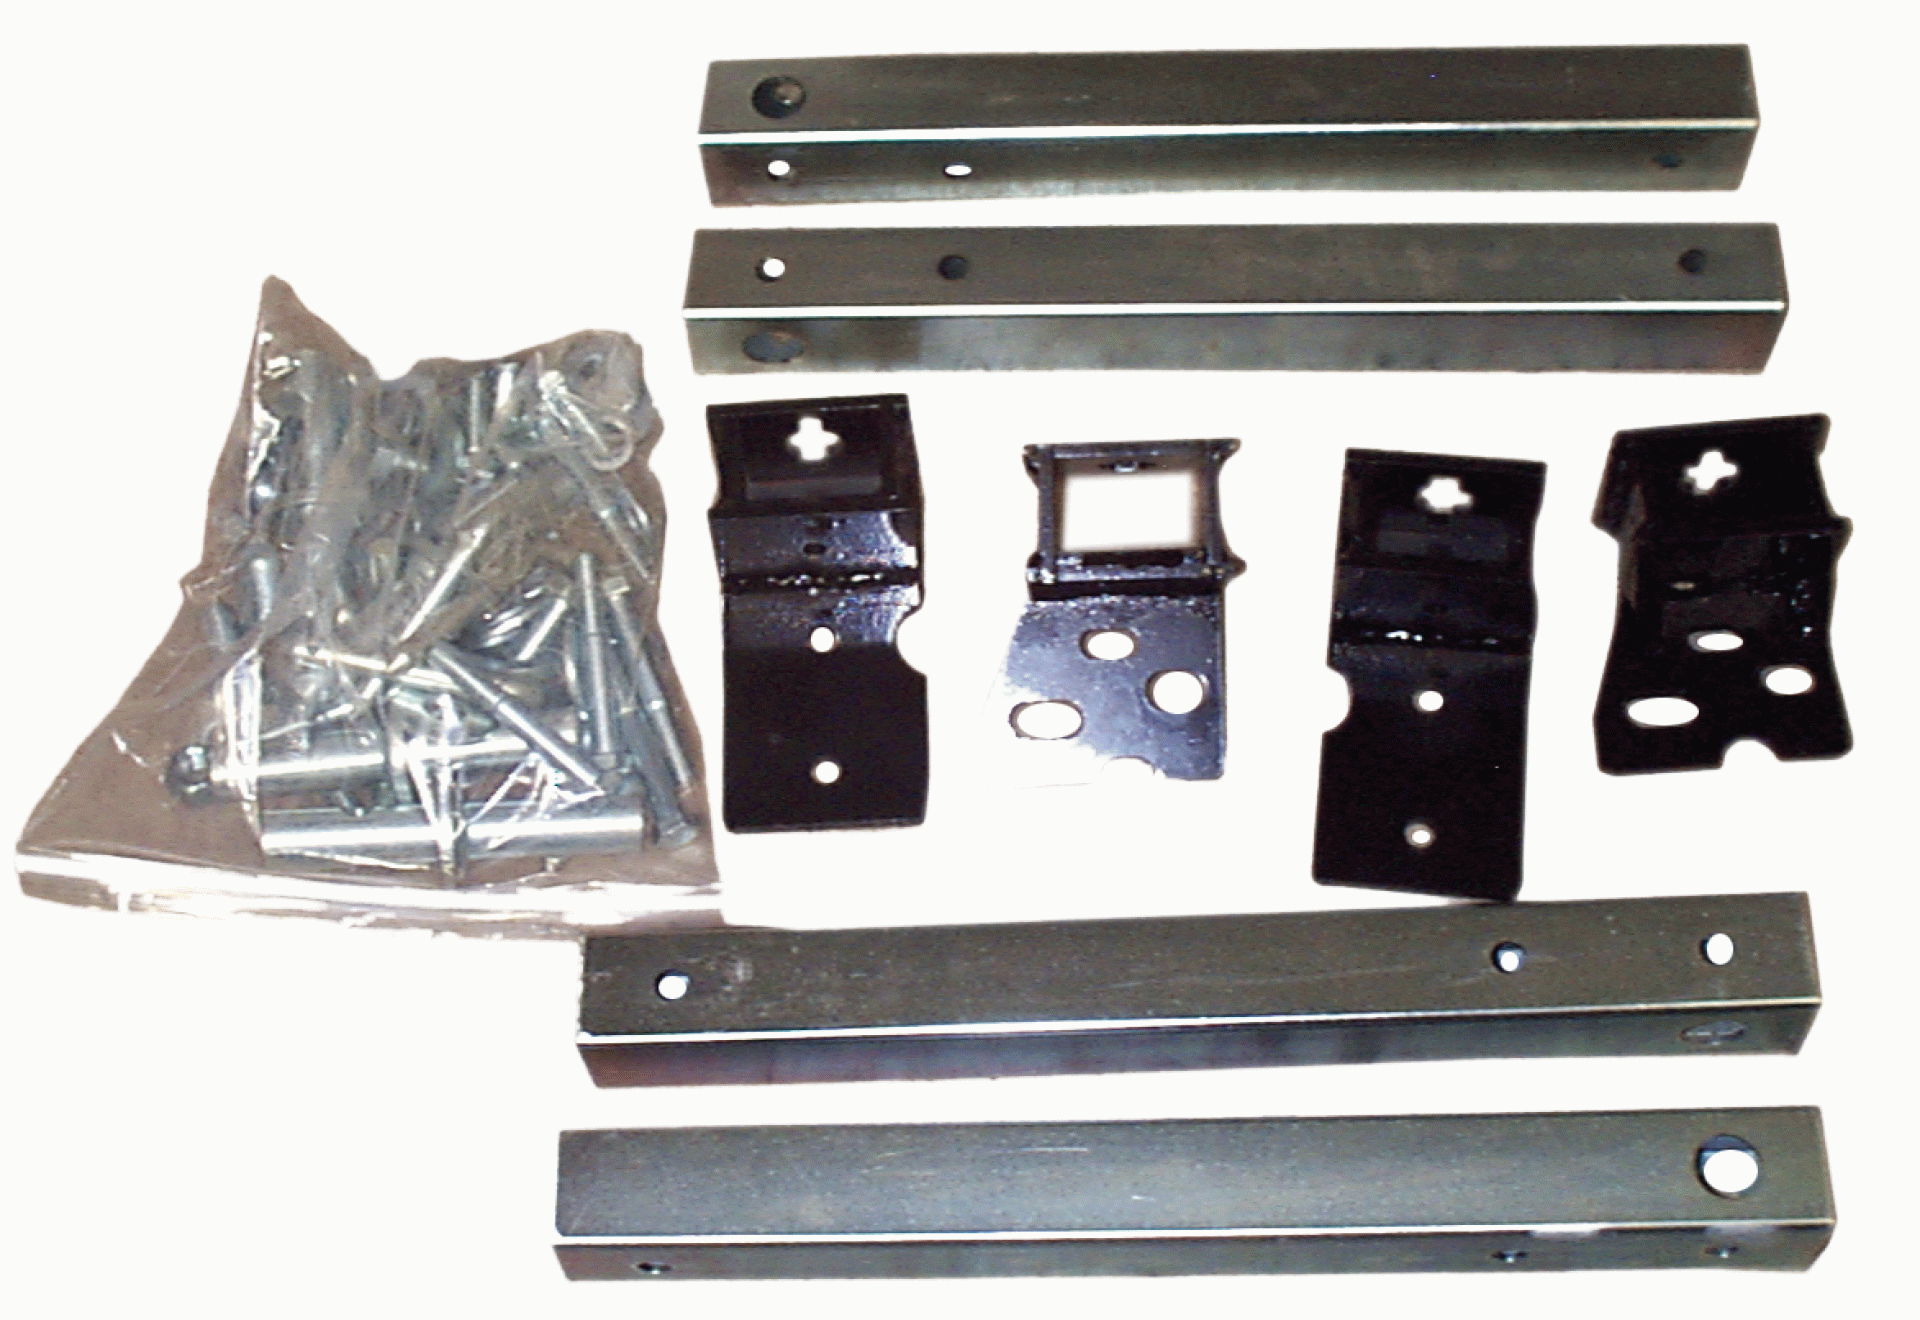 Pull Rite | 3114 | MOUNTING BRACKET KIT 12K SUPER GLIDE 04-05 CHEVY 1500 W/5 FEET 8 INCH BED